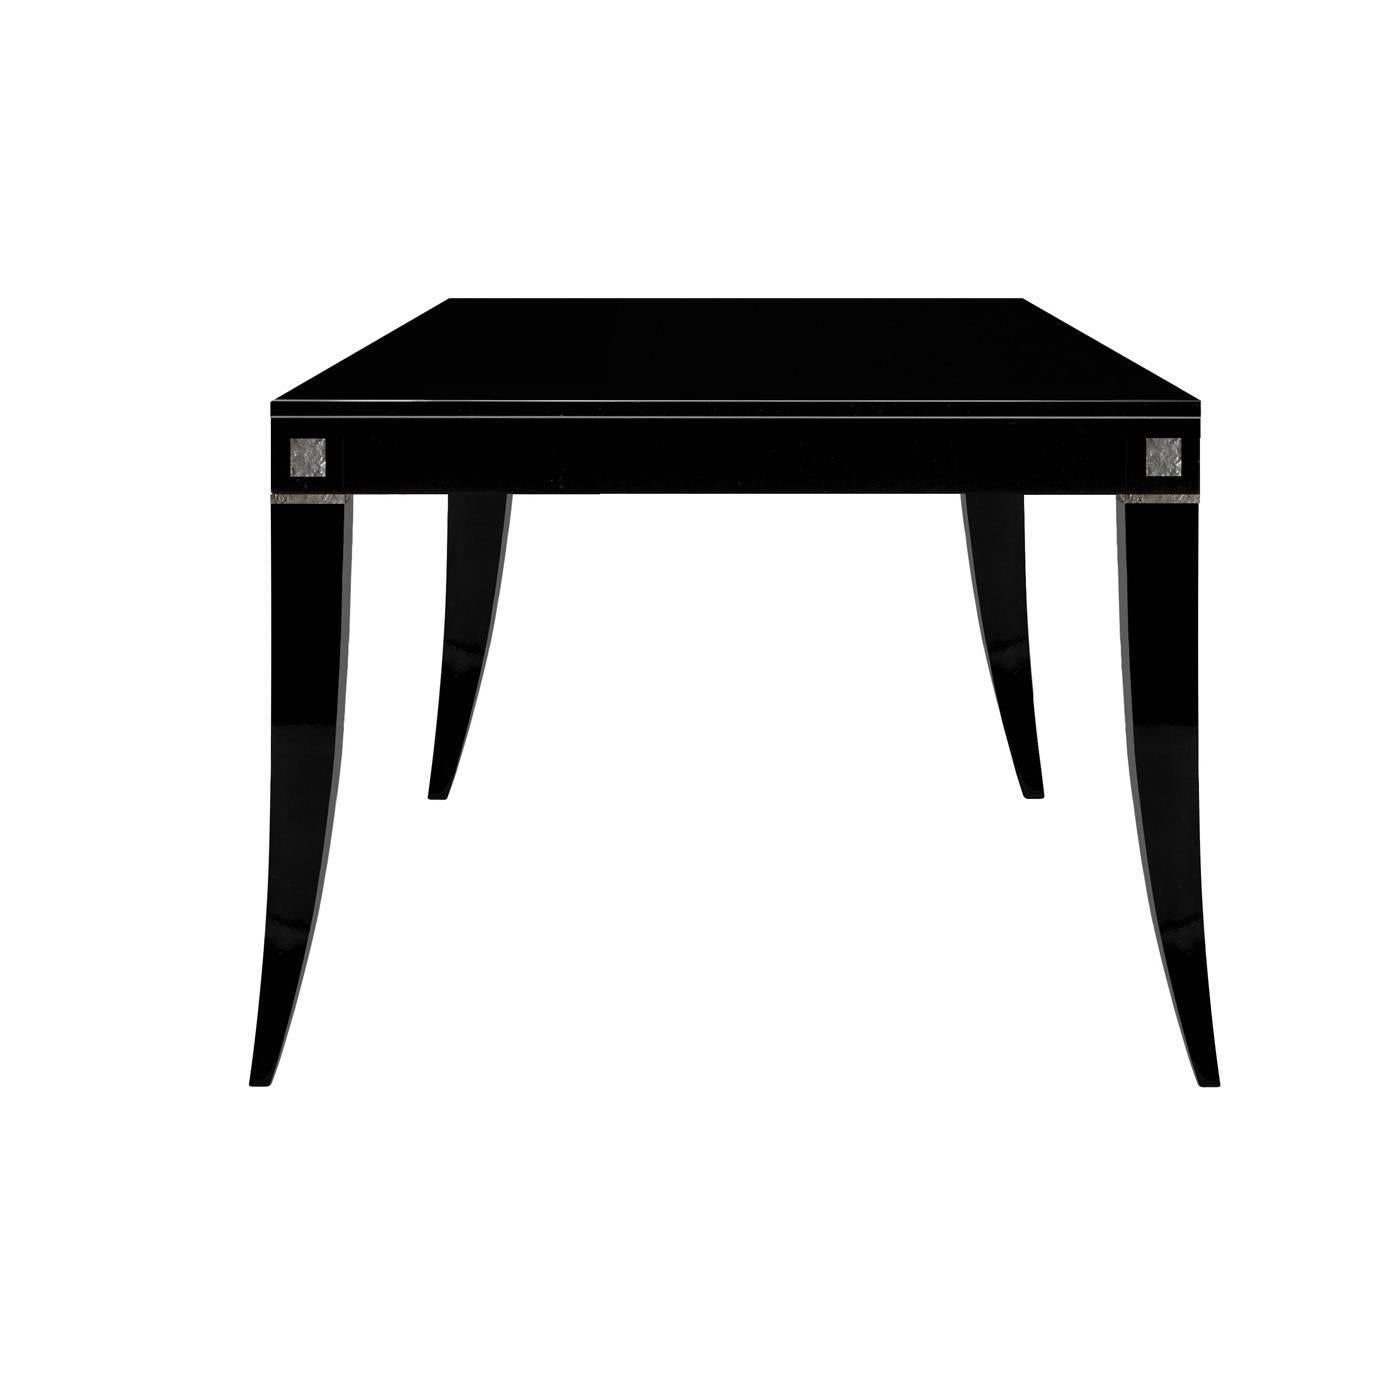 This table with its Minimalist look has a modern design with a timeless elegance. Its rectangular top is supported by four elegantly curved legs, all finished with a matte black lacquer.

